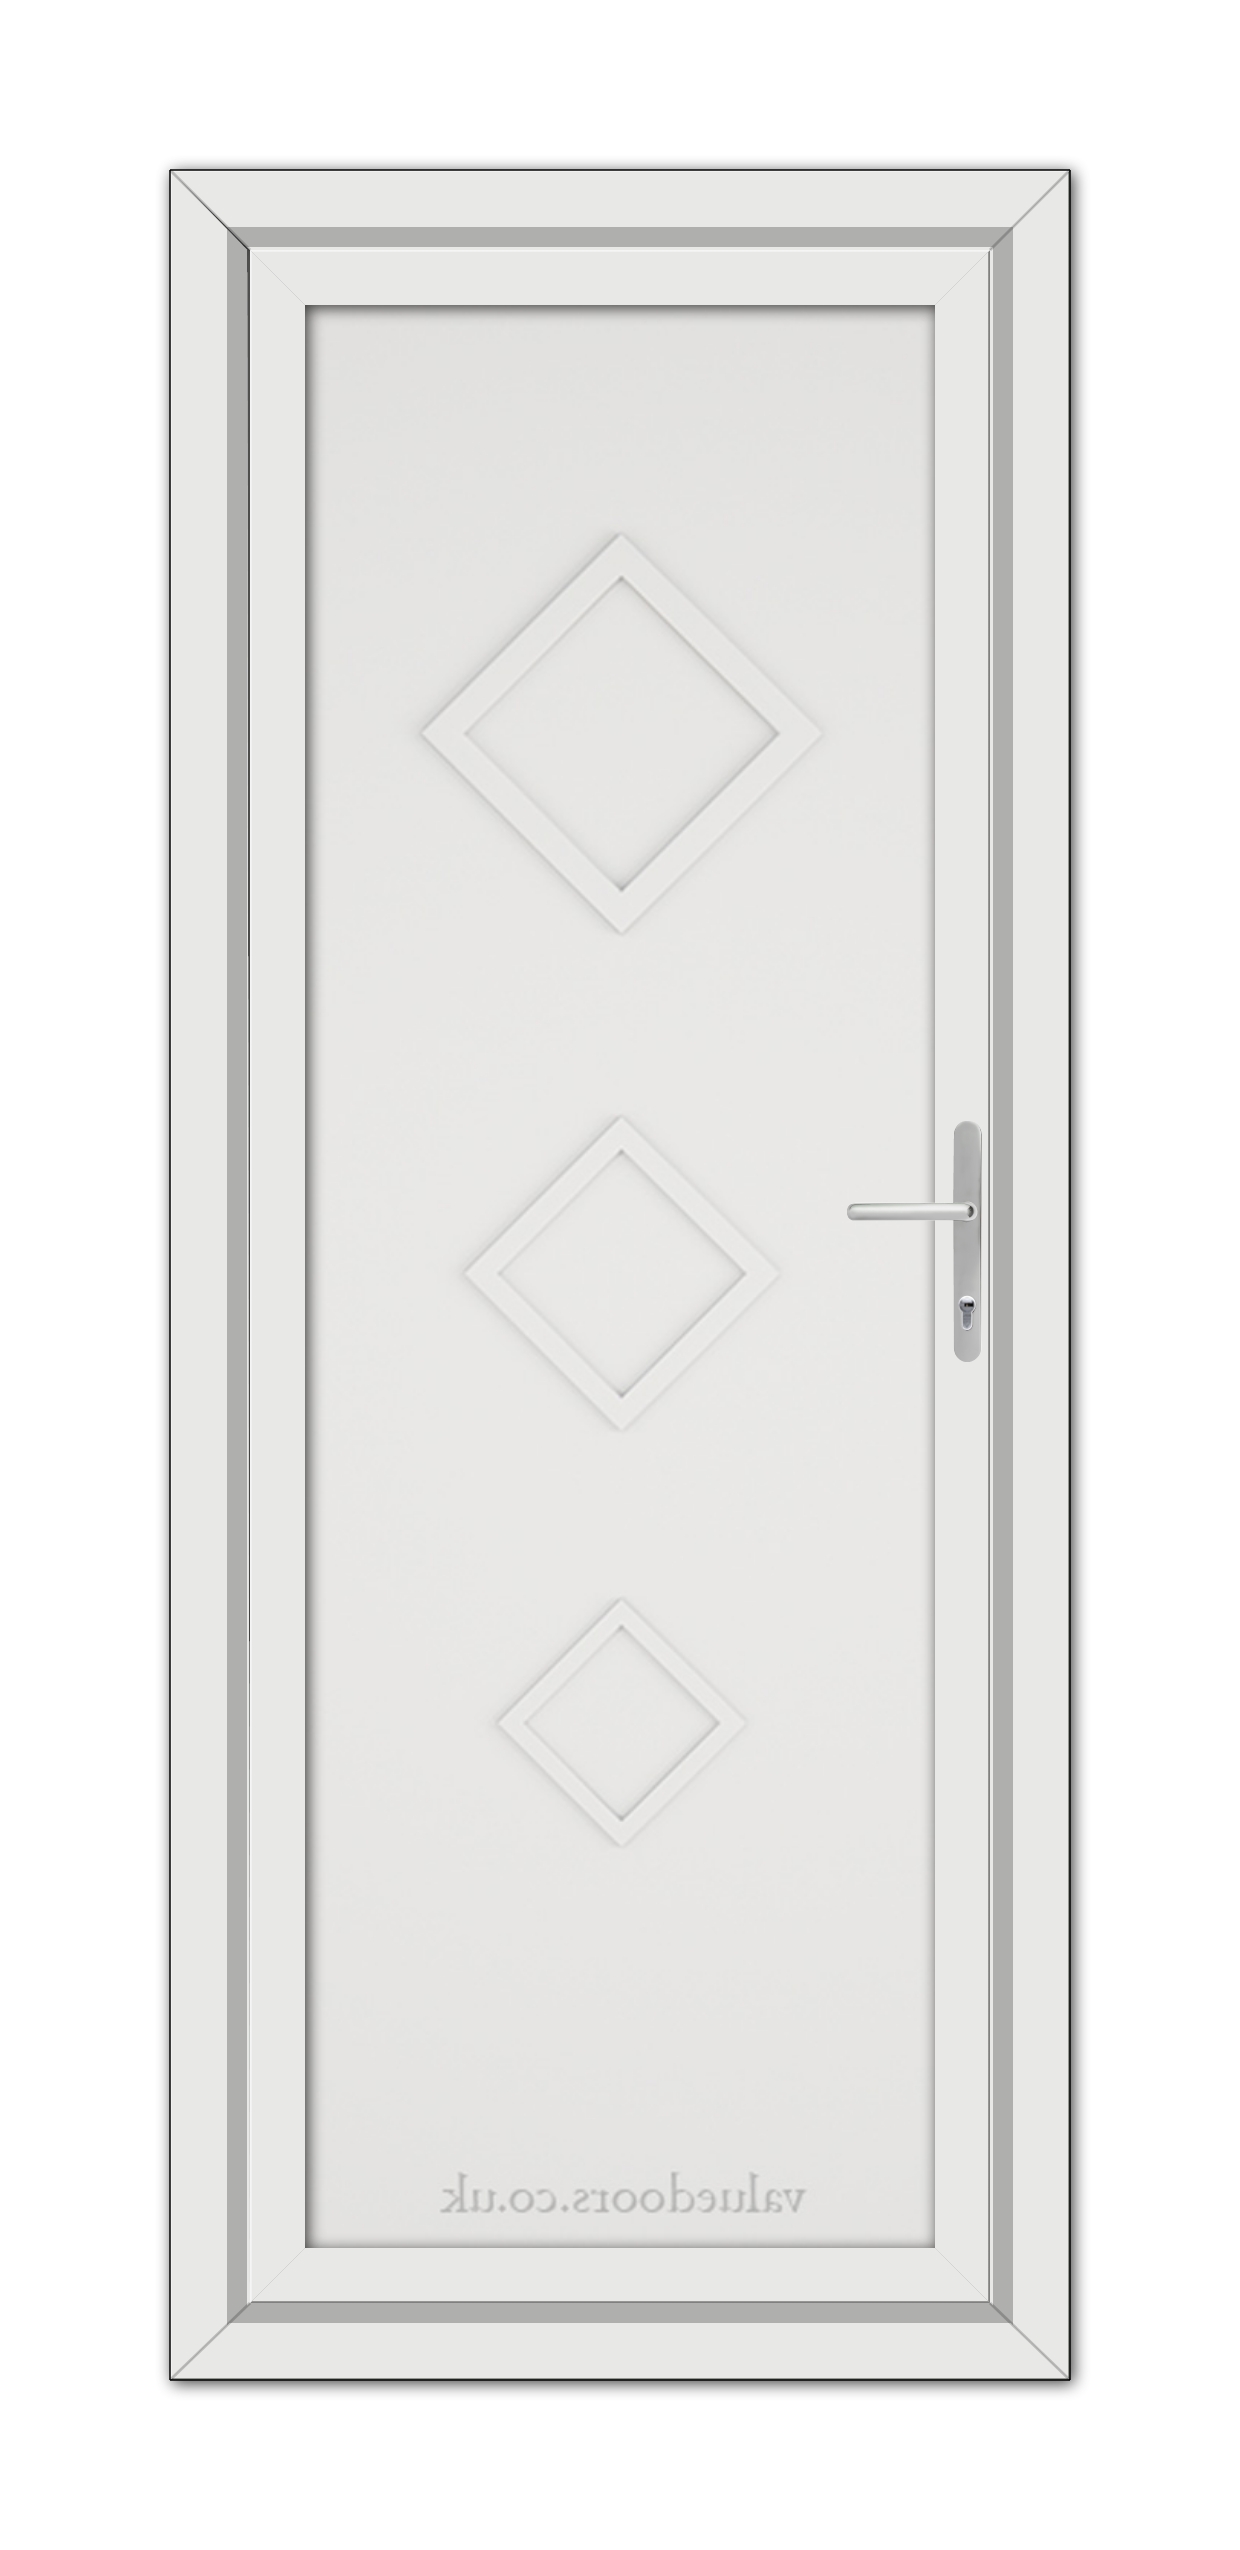 A White Modern 5123 Solid uPVC Door with three diamond-shaped panels and a metallic handle, viewed from the front.